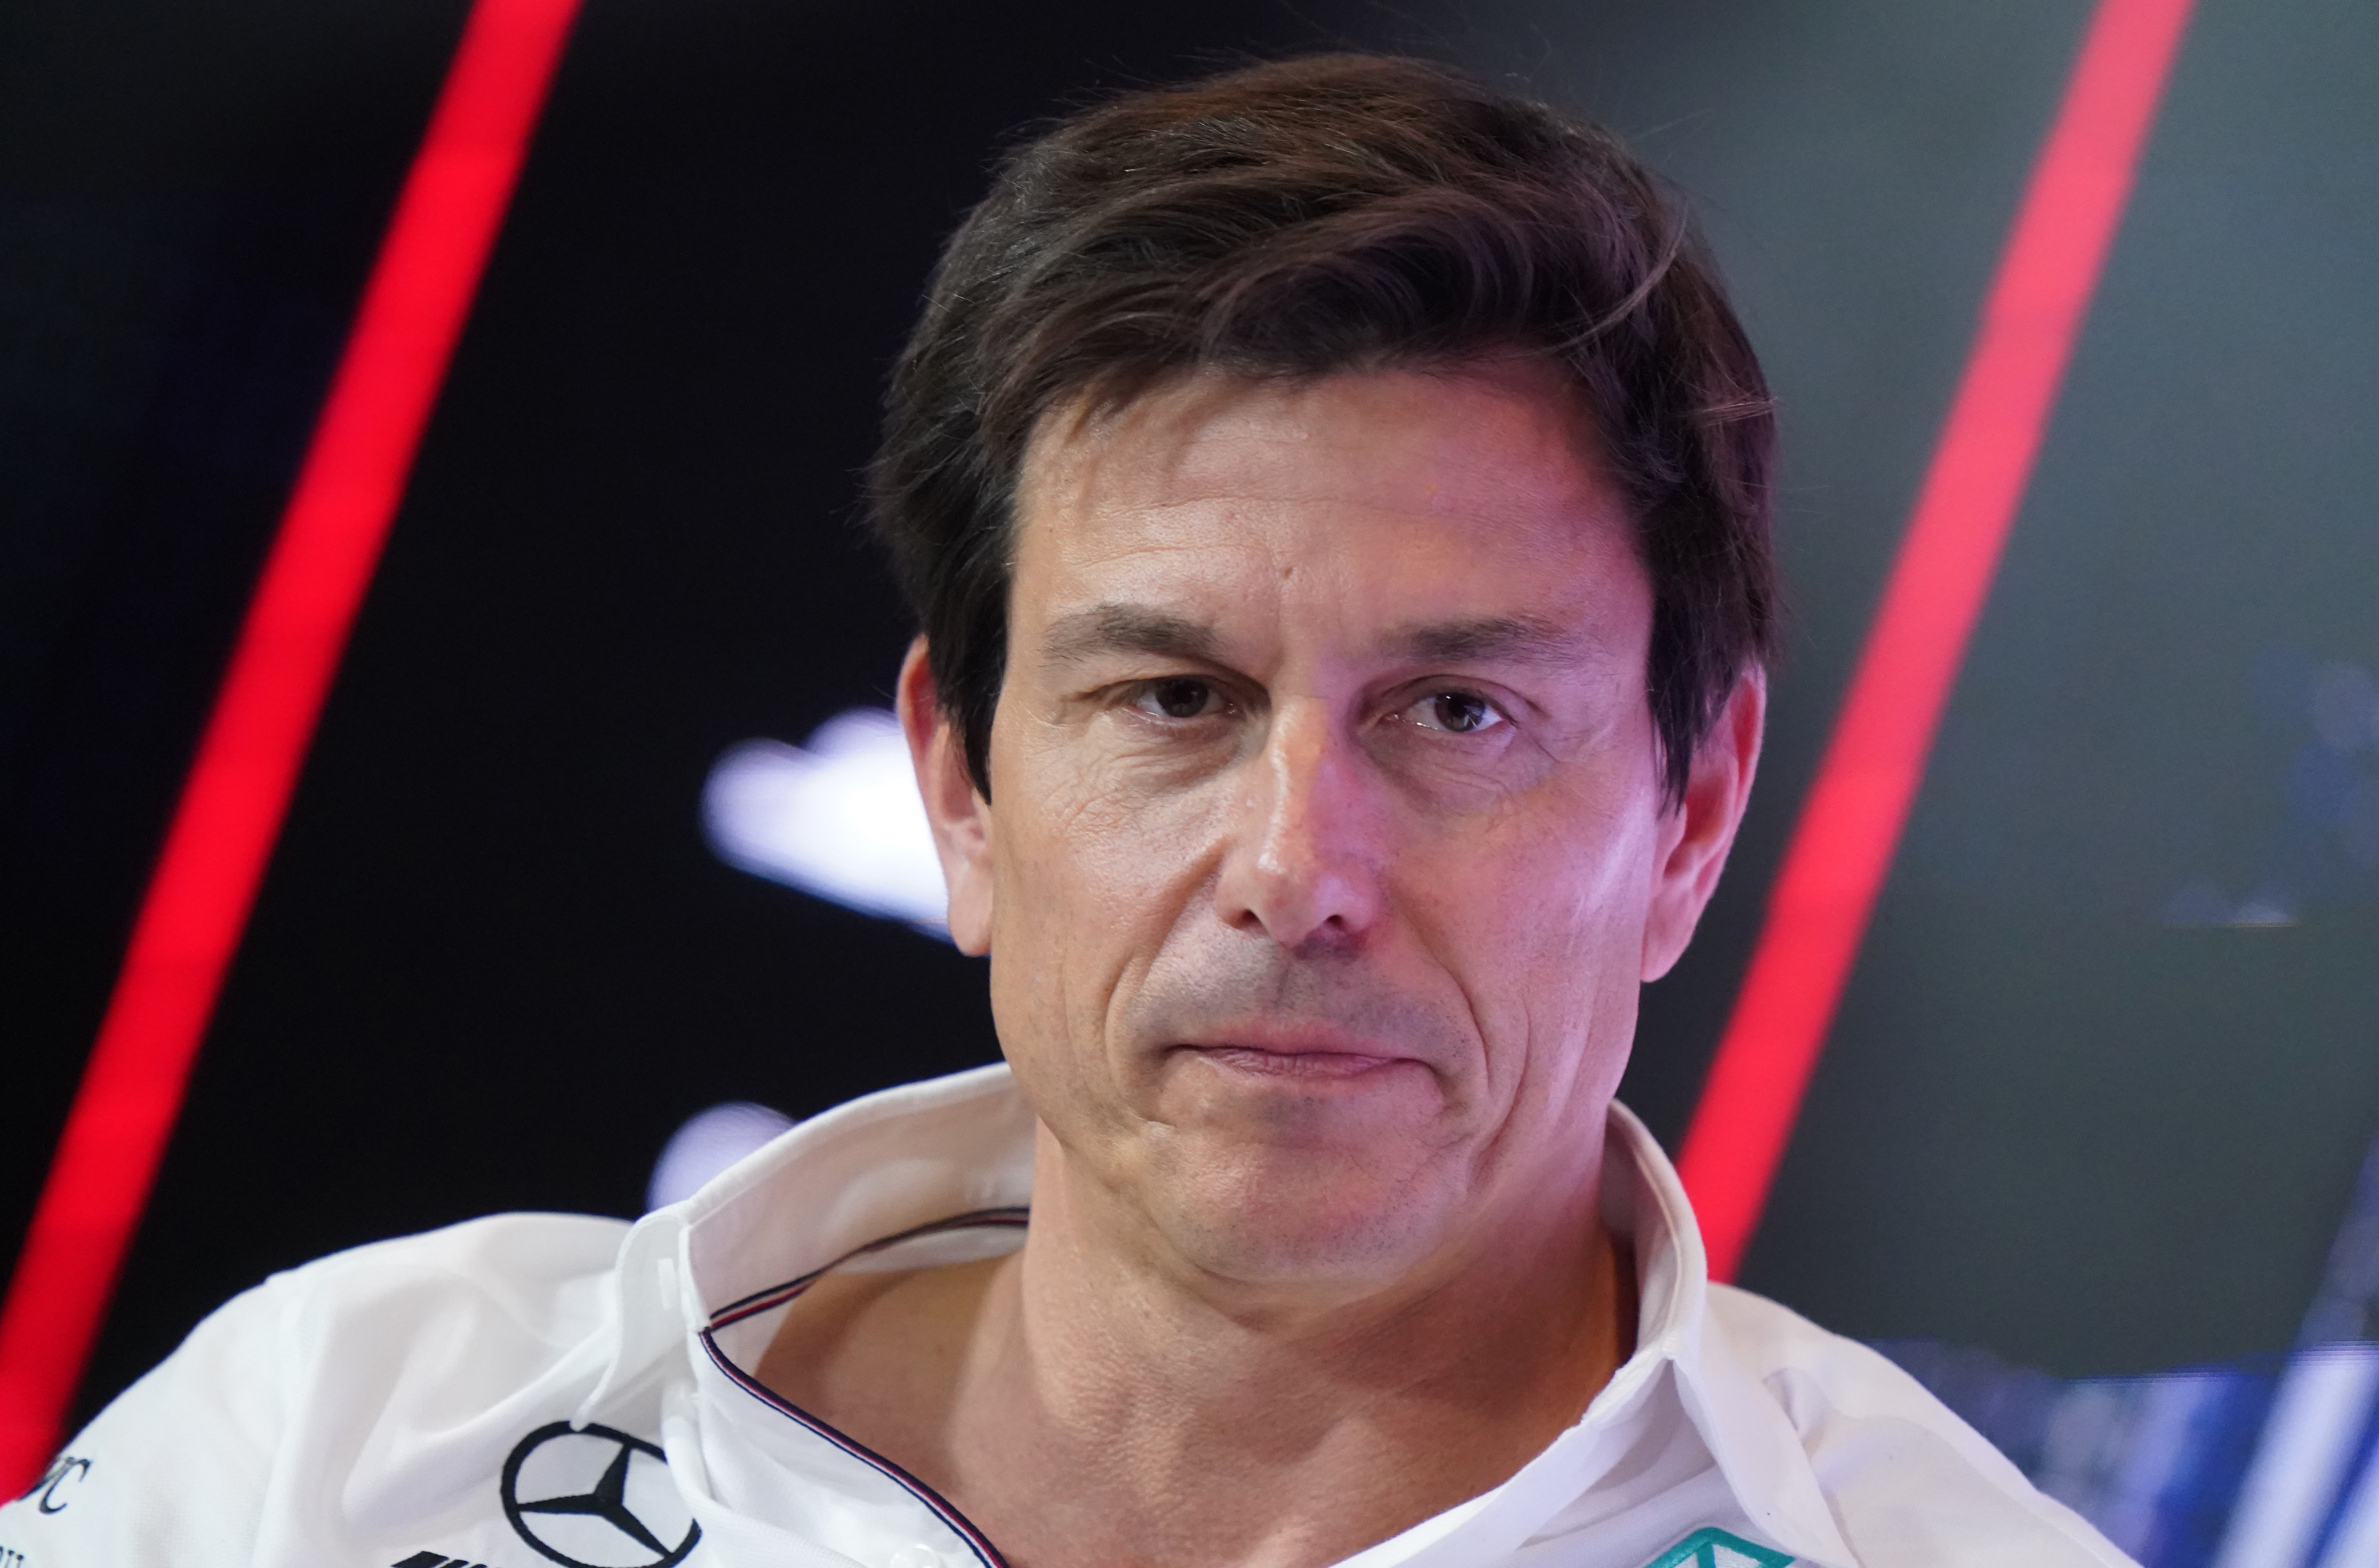 Wolff described Verstappen's record winning streak as 'completely irrelevant' and 'for Wikipedia'